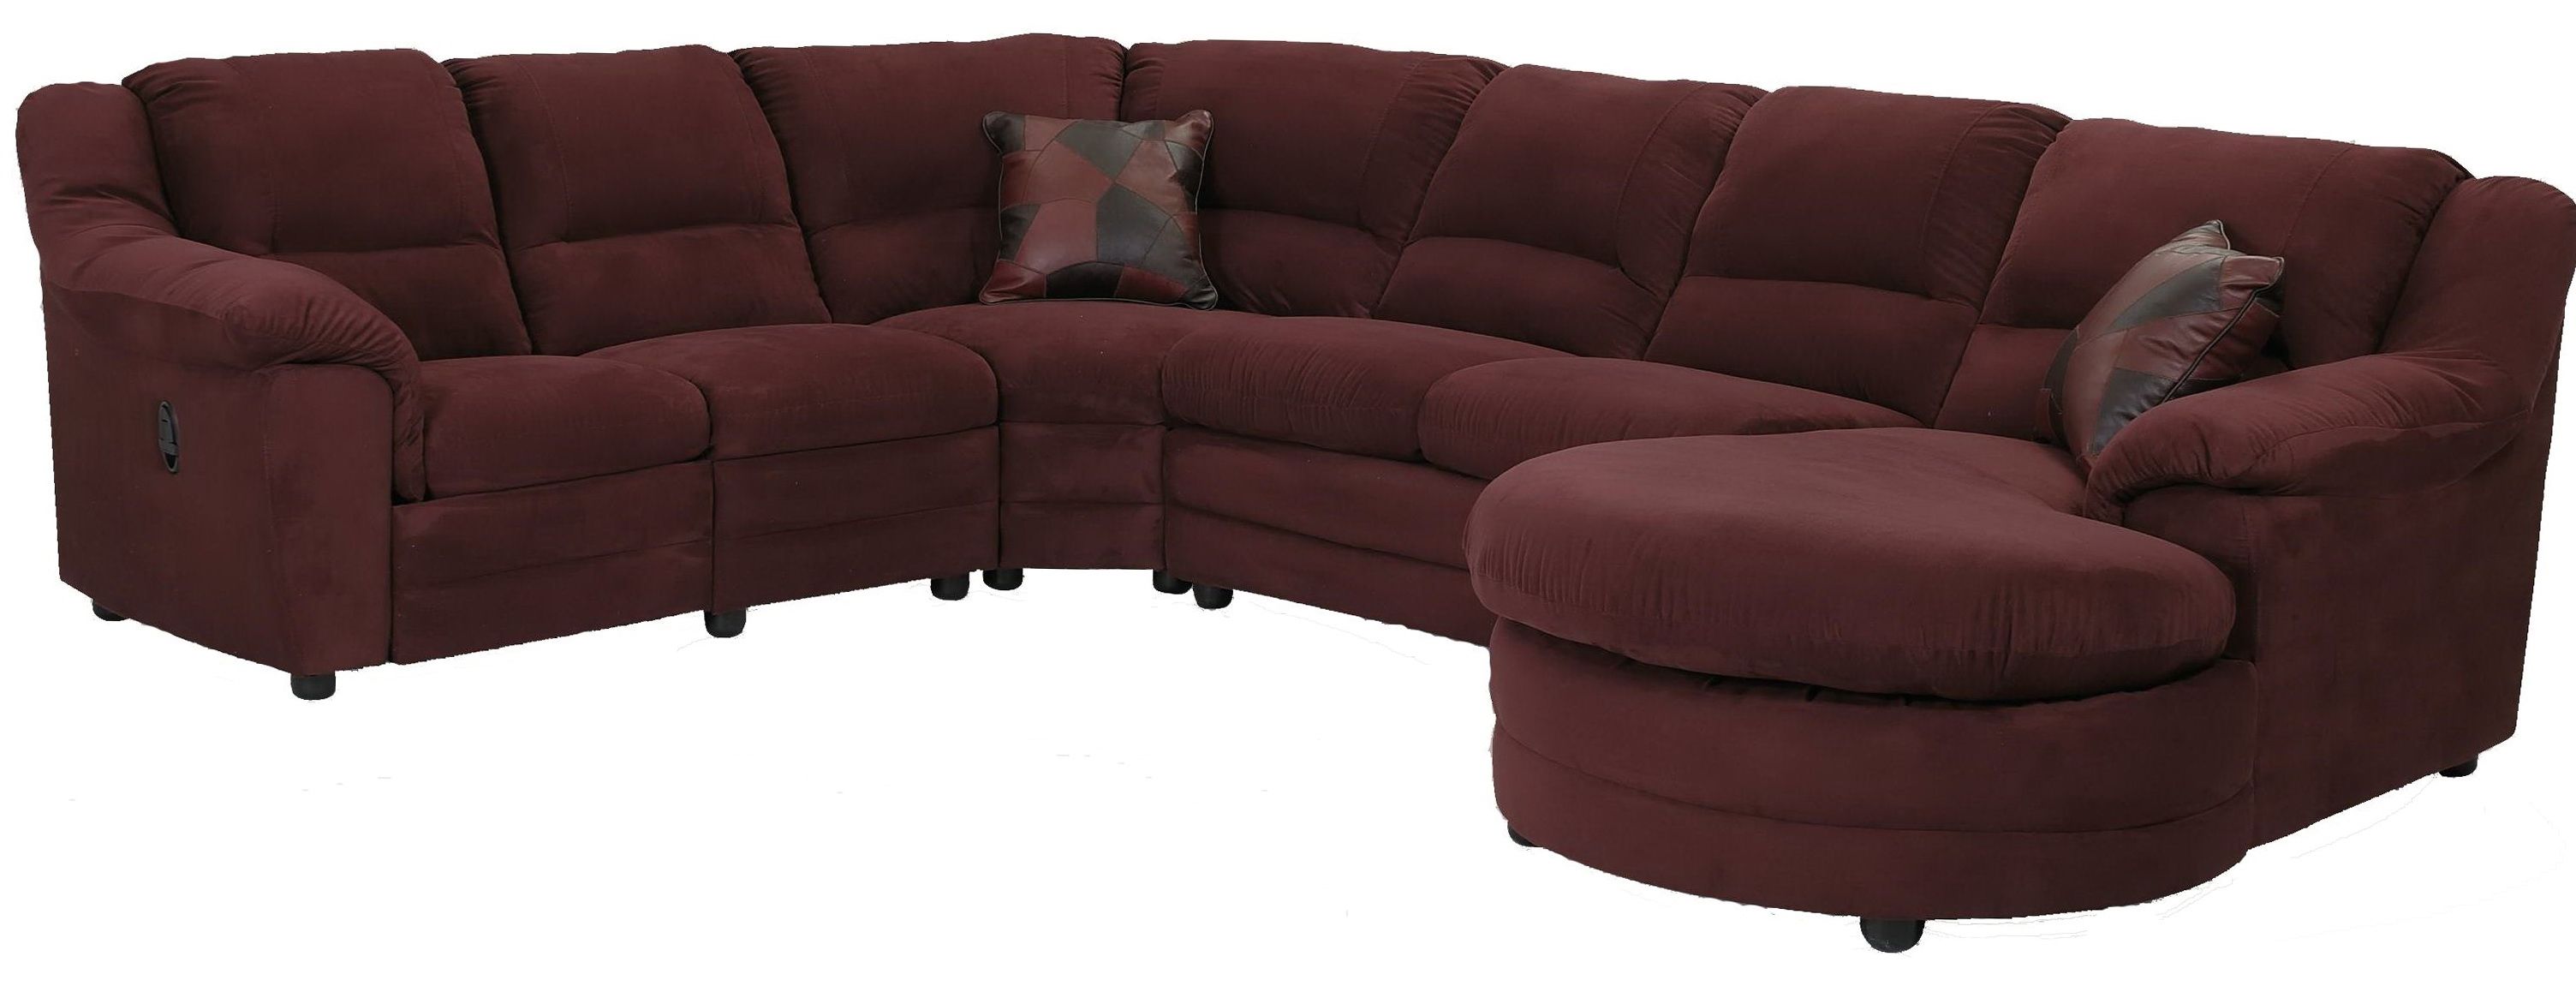 Most Popular Oversized Sectional Couch In Maroon Color With Circular Chaise For Sectional Sofas With Chaise Lounge (View 11 of 15)